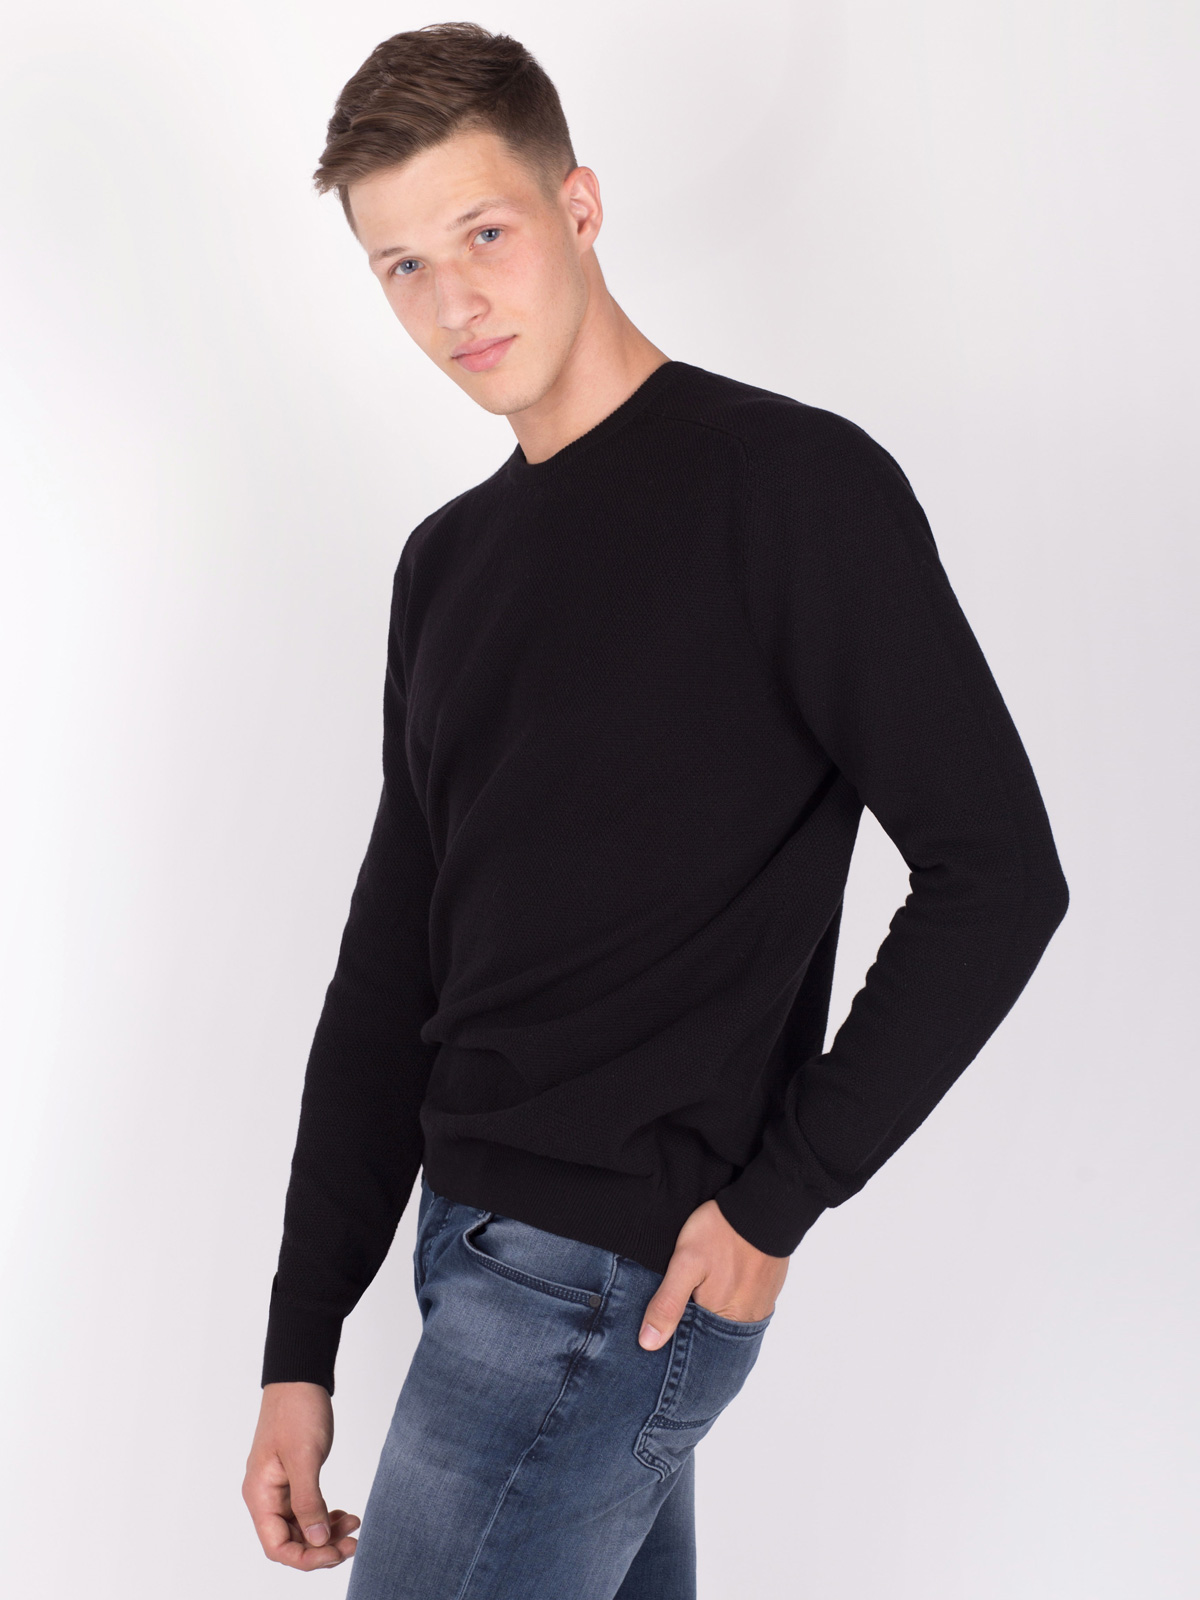 Cotton sweater in black - 35285 € 16.31 img2